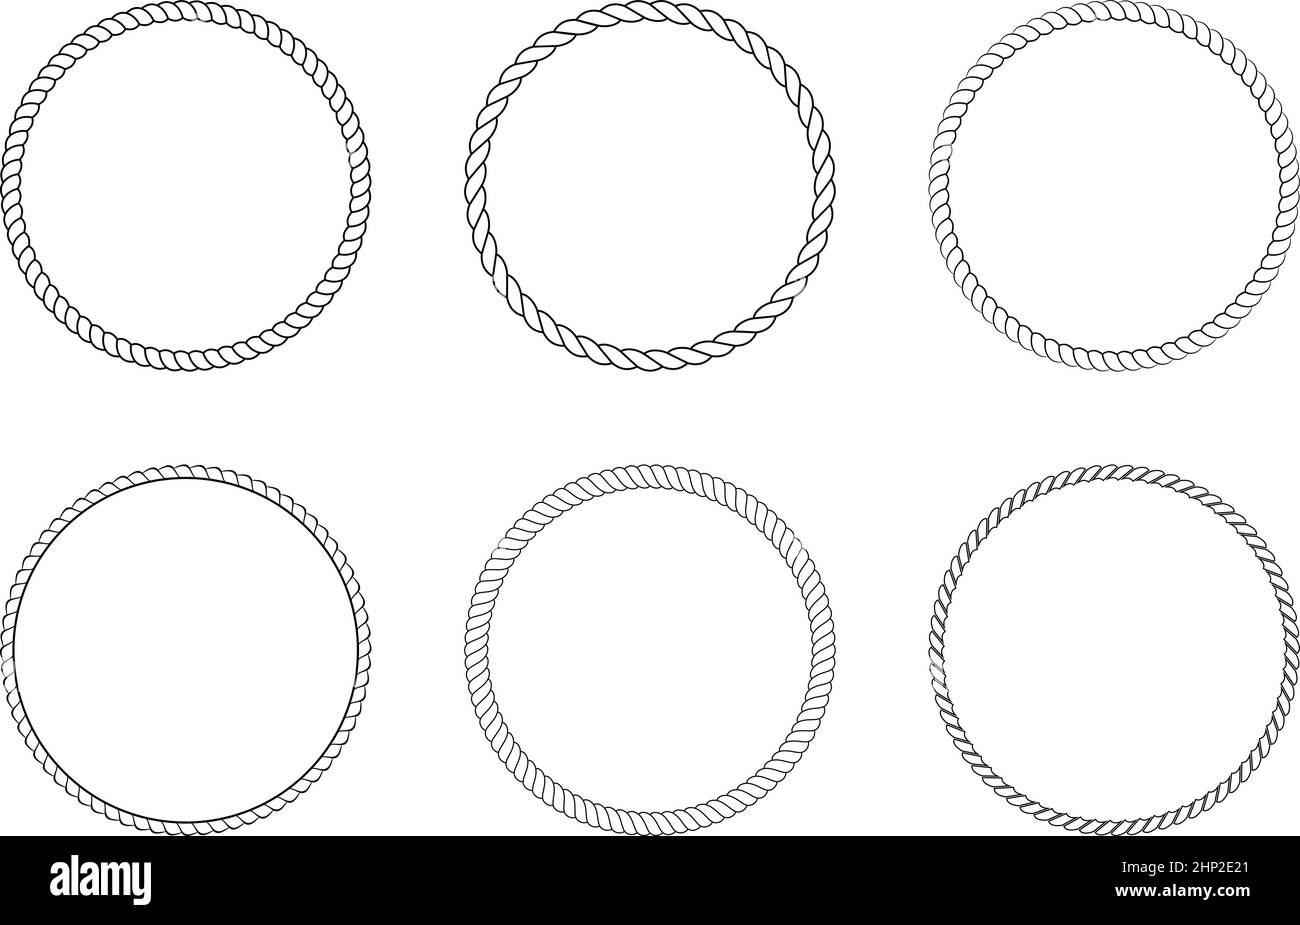 Cord or rope circle set arrangement as vector on an isolated white background. Stock Vector